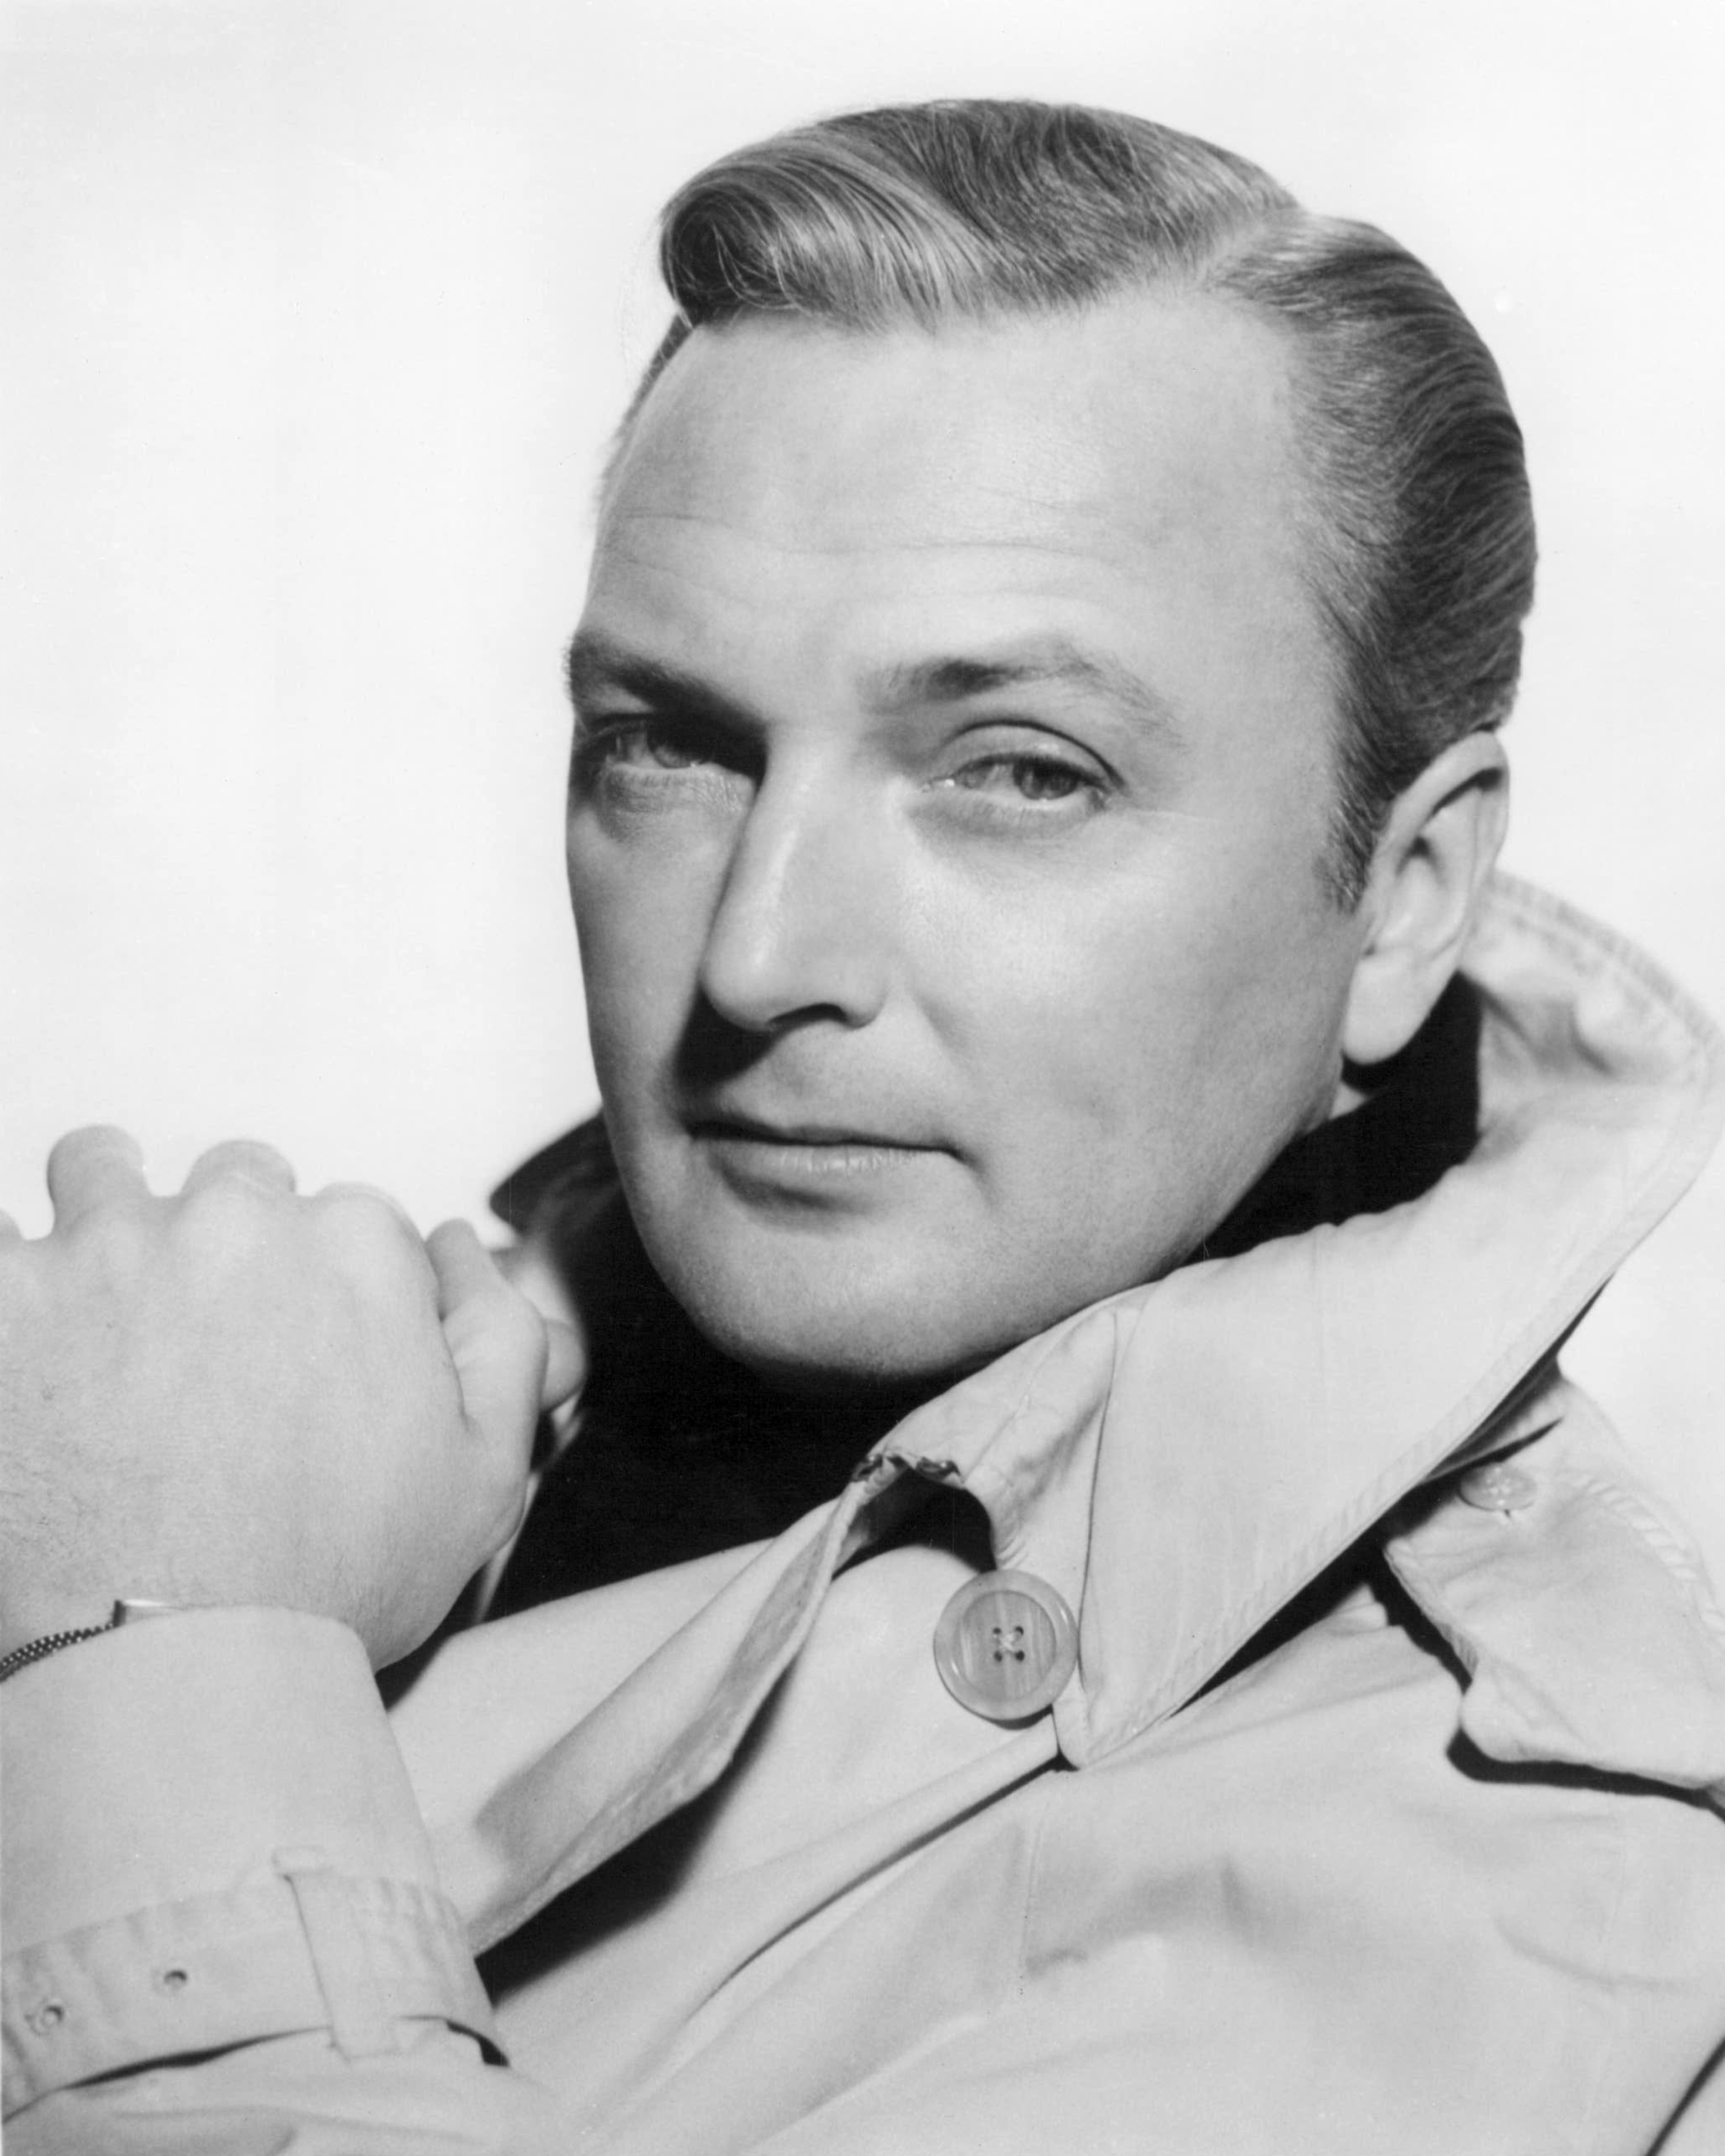 American actor Jack Cassidy (1927 - 1976), circa 1950. | Source: Getty Images